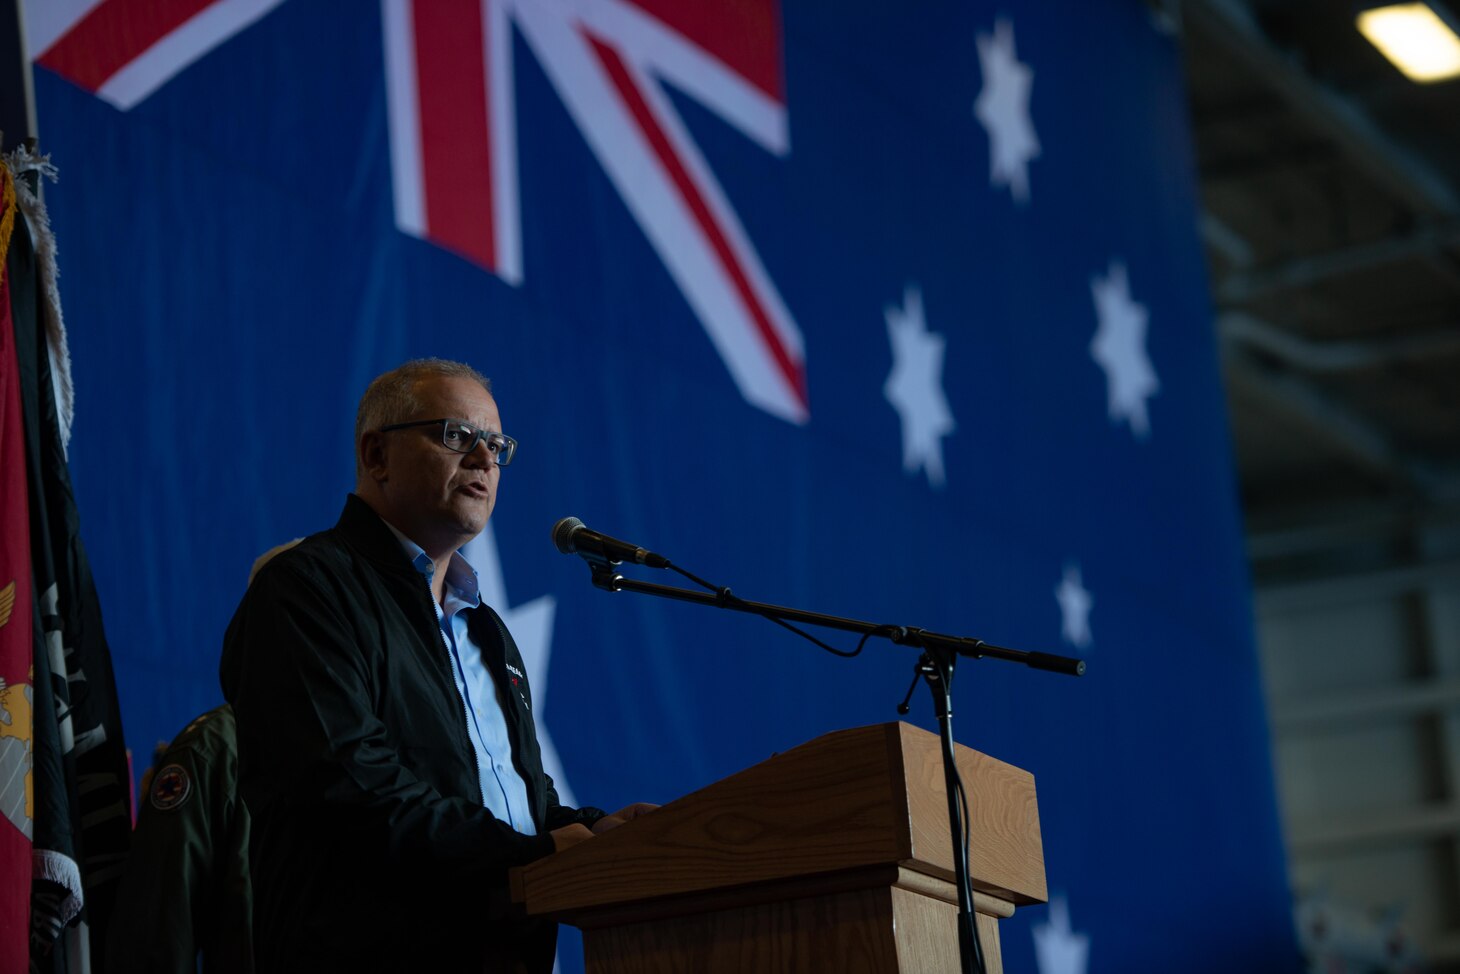 CORAL SEA (July 12, 2019) Prime Minister Scott Morrison,
prime minister of Australia, speaks to Sailors aboard the Navy's
forward-deployed aircraft carrier USS Ronald Reagan (CVN 76) during Talisman Sabre 2019. Morrison was given a tour of the ship before speaking with the crew during an all-hands call. Talisman Sabre 2019 illustrates the closeness of the Australian and U.S. alliance and the strength of the
military-to-military relationship. This is the eighth iteration of this
exercise.